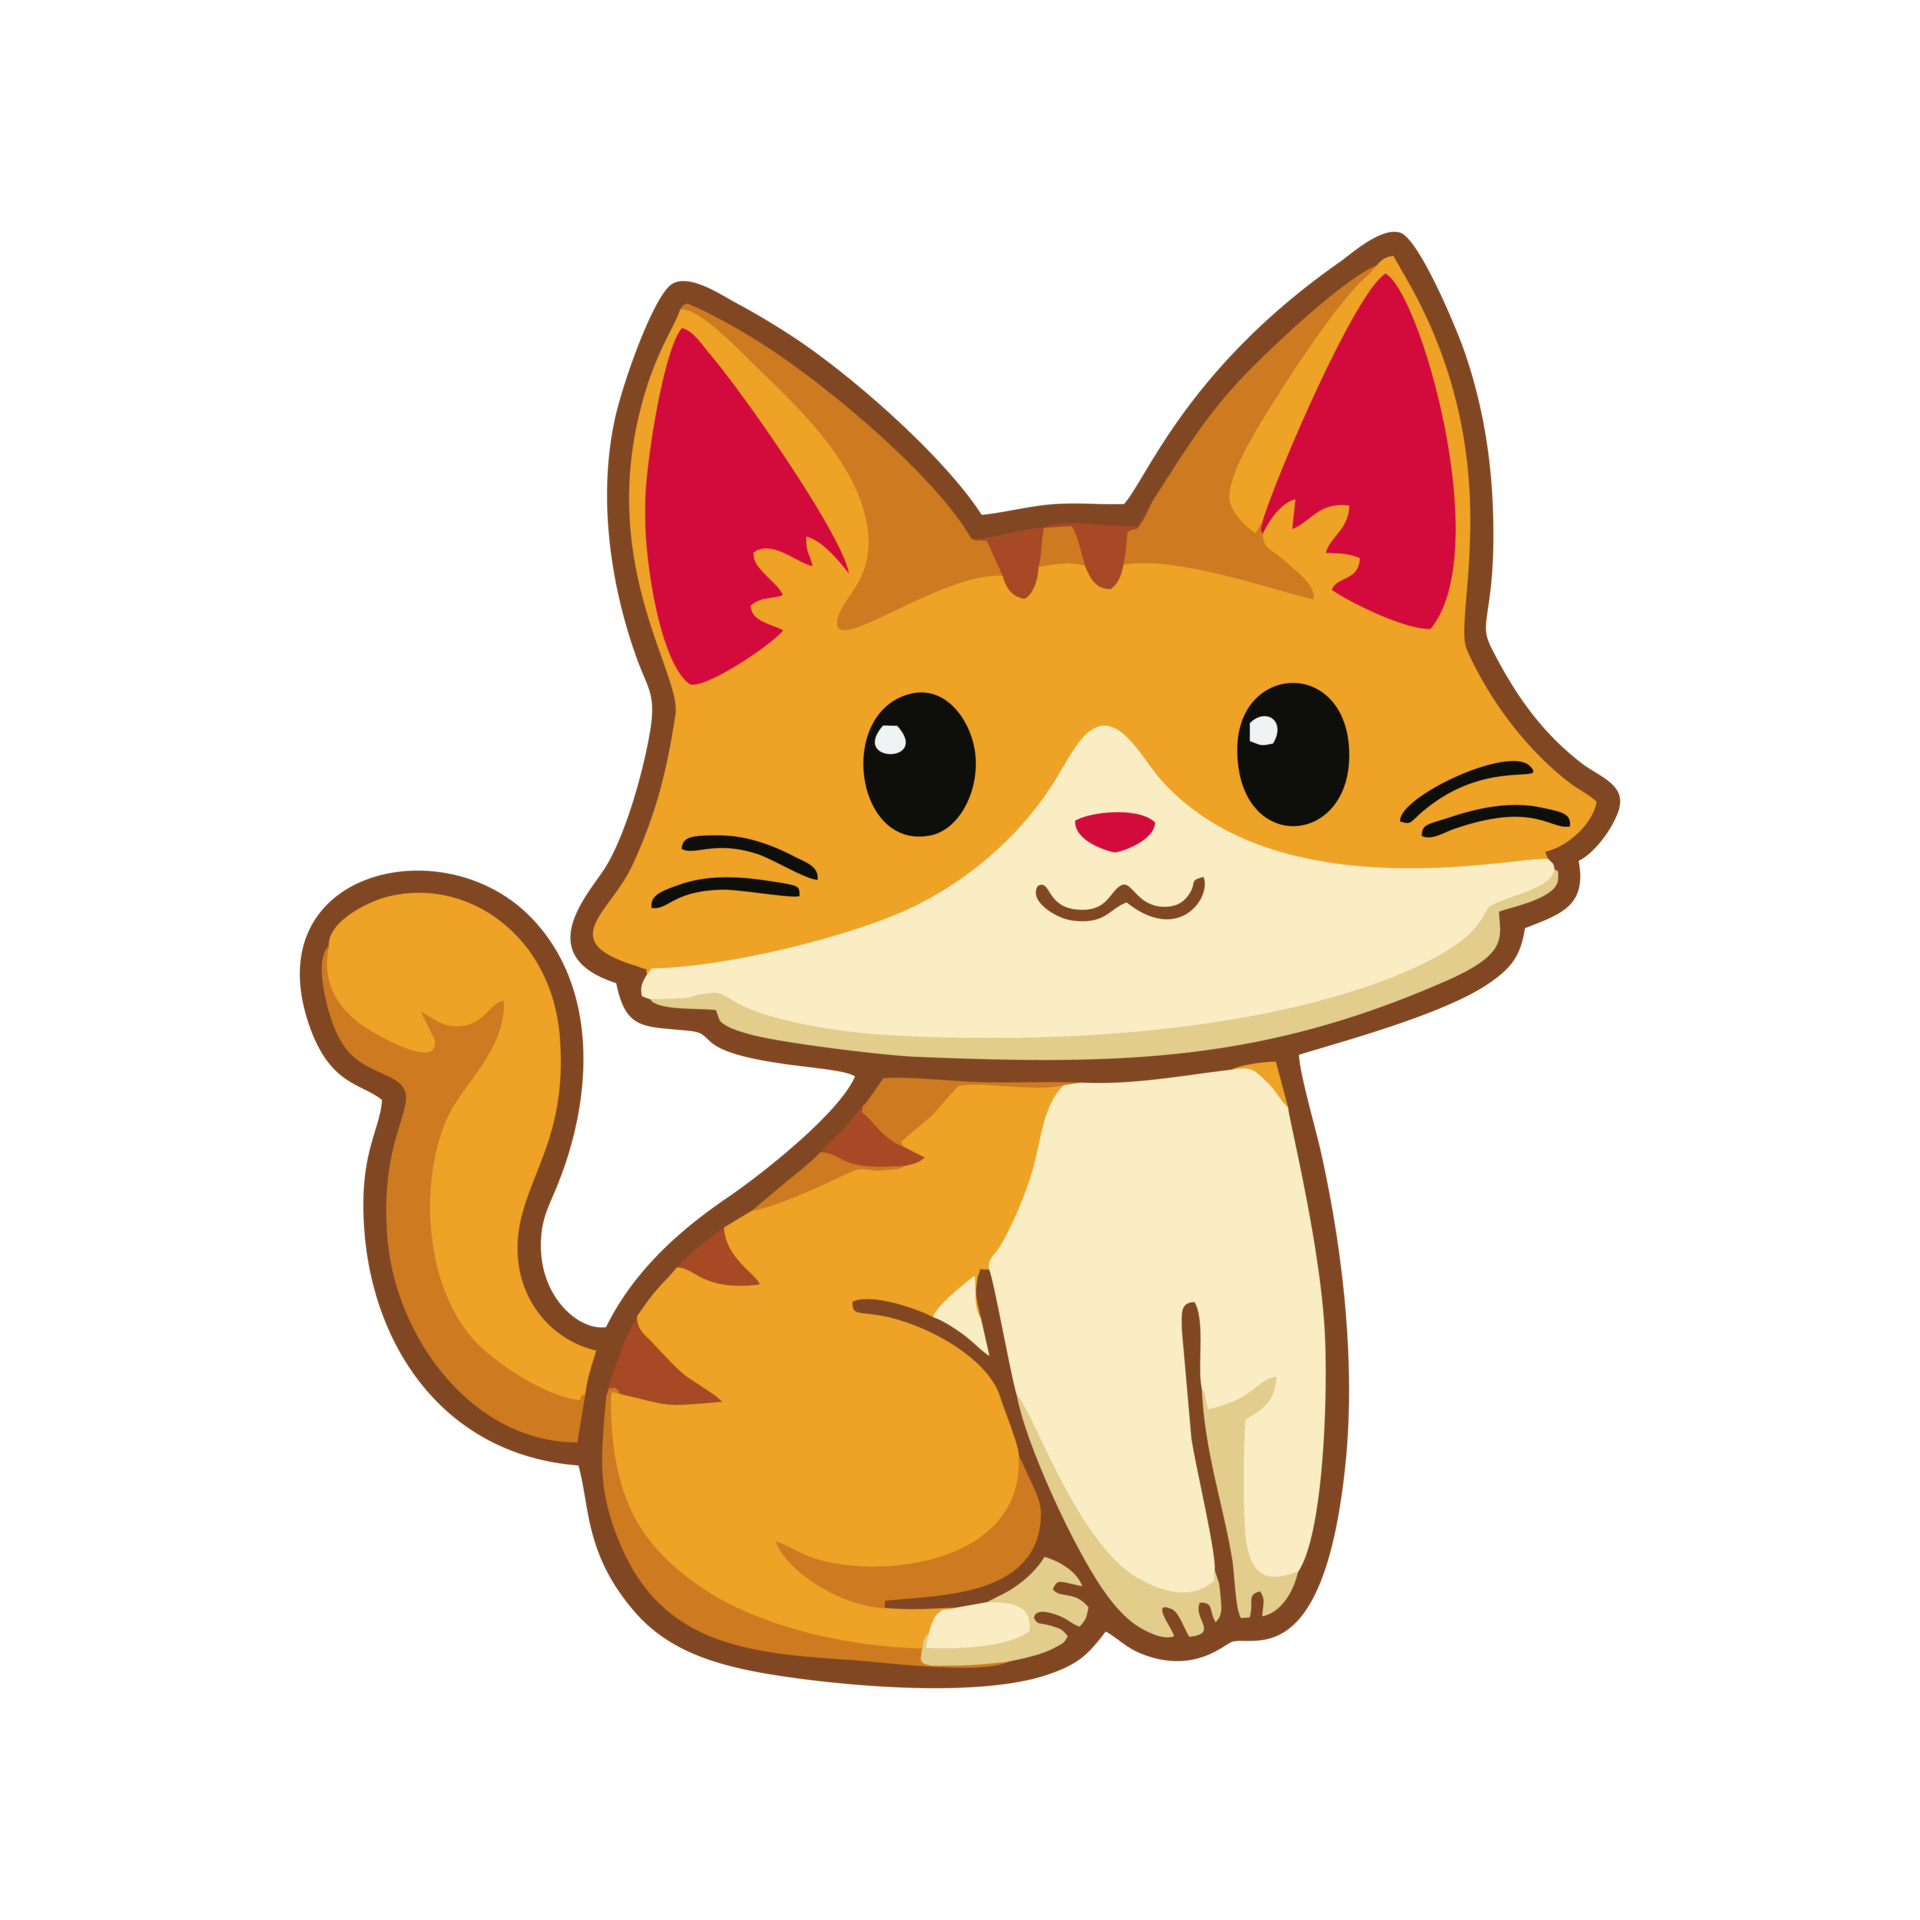 Free Illustration of cute colored cat. Cartoon cat image in png format.  Suitable for children's book design elements. Introduction of cats to  children. Books or posters about animal 13078569 PNG with Transparent